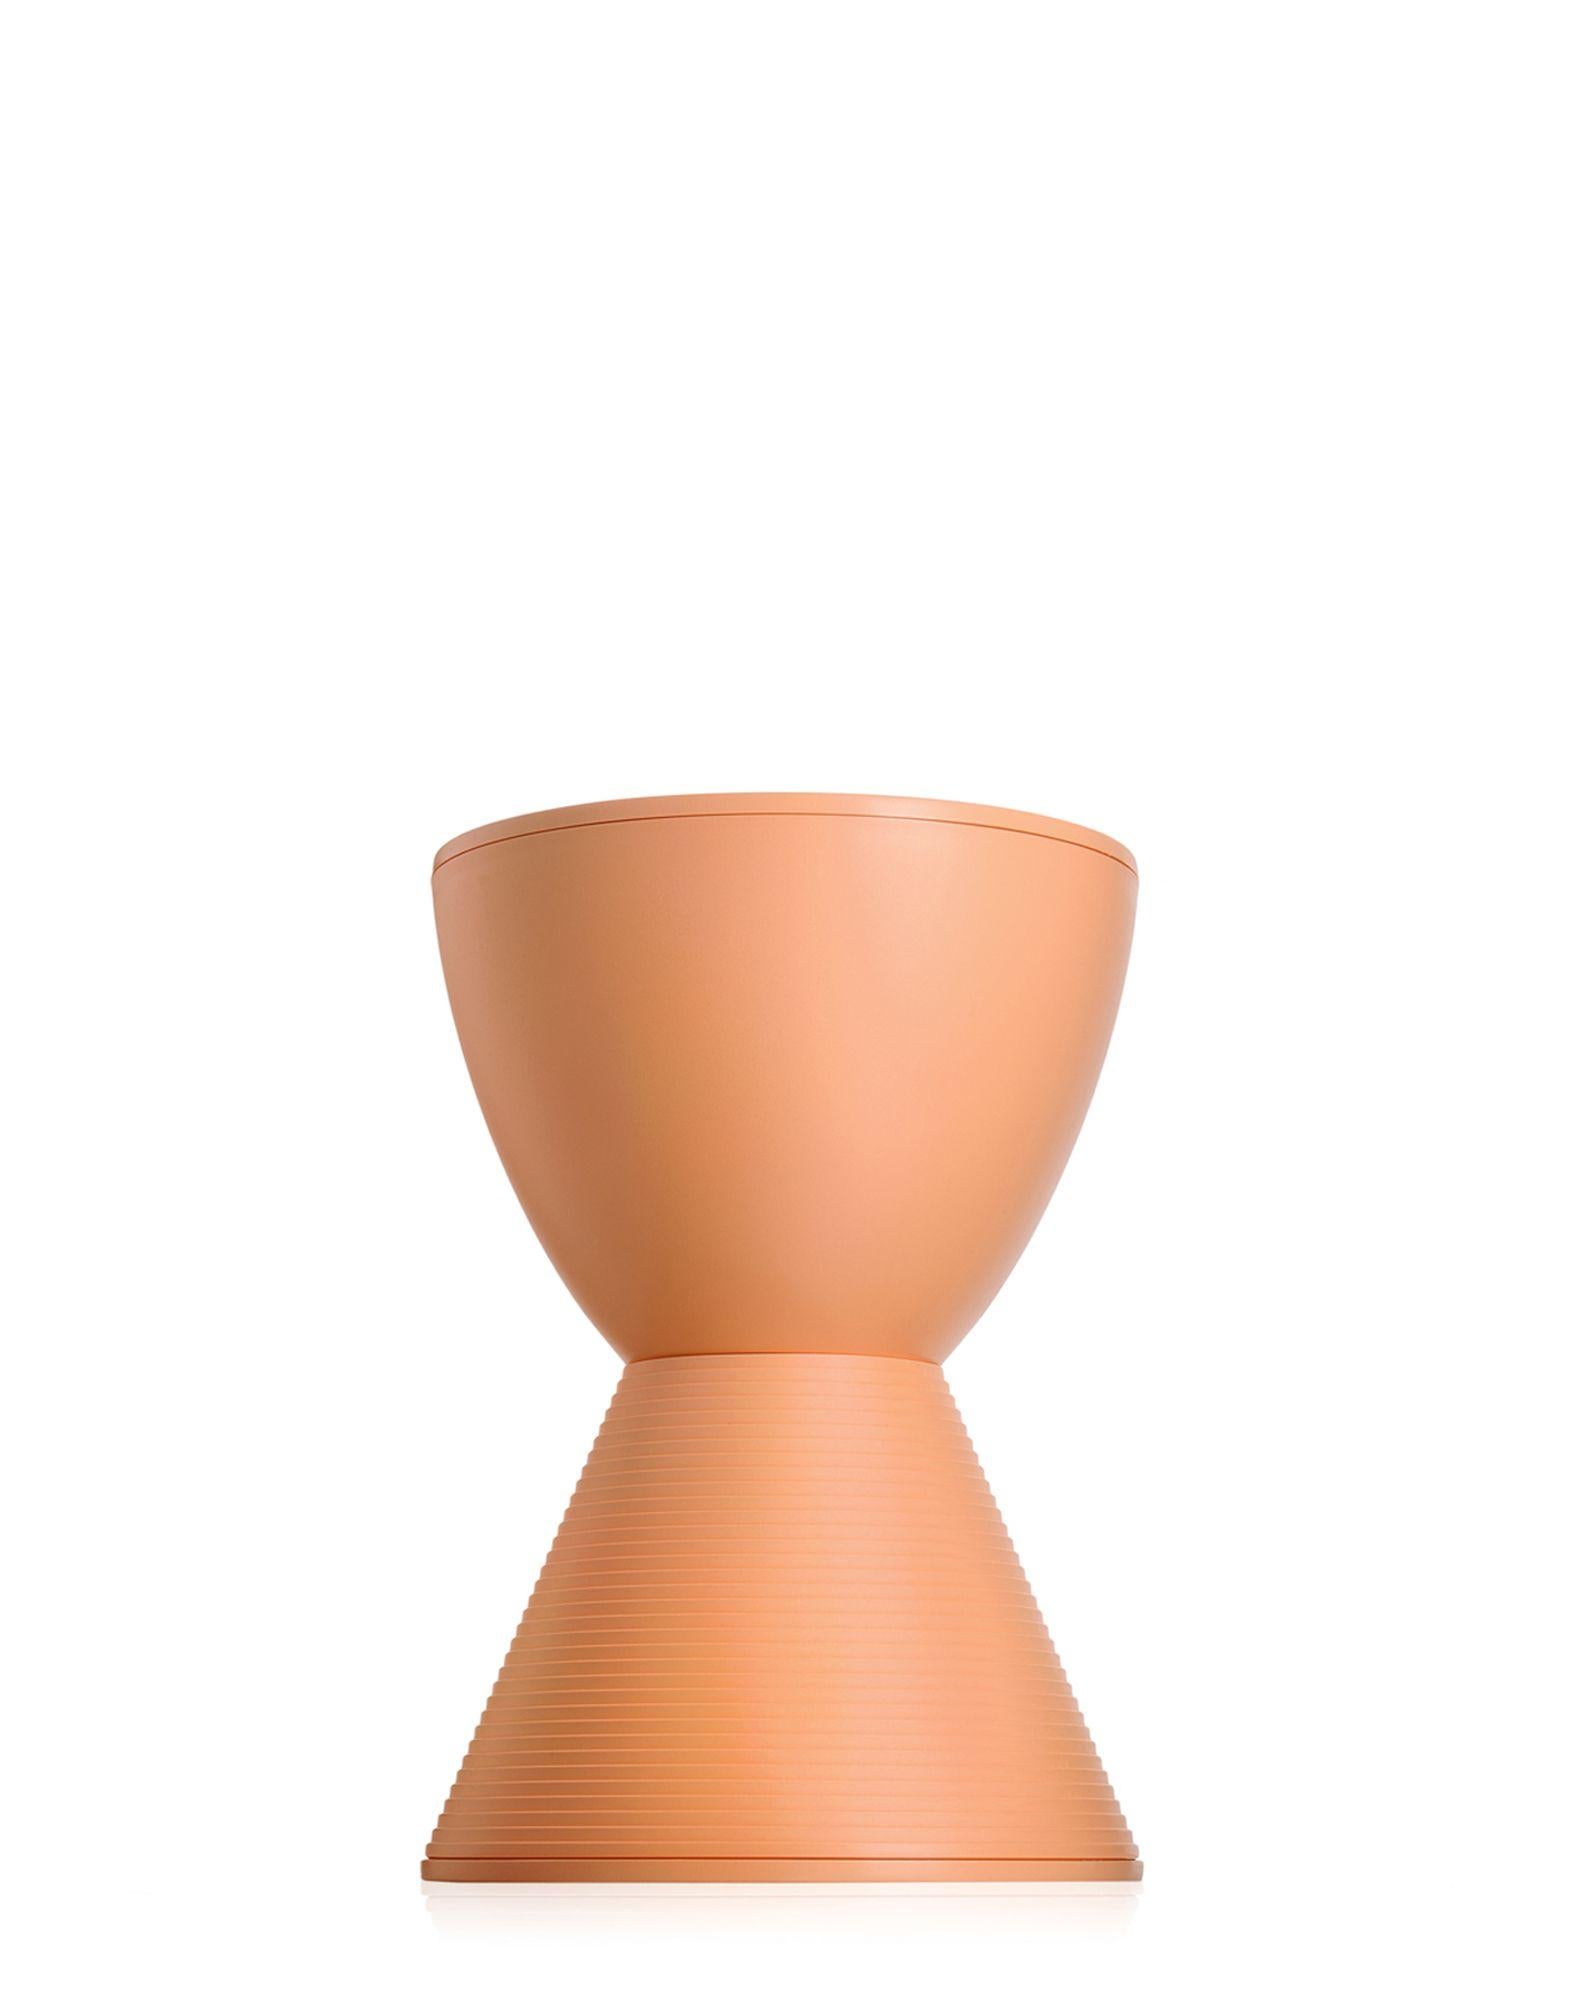 Thought up as a colorful game of building blocks, the Prince Aha stool is composed of two cones to resemble the shape of an hourglass. An entertaining and colorful accessory, a practical stool and stand to place beside the couch or the bed. The